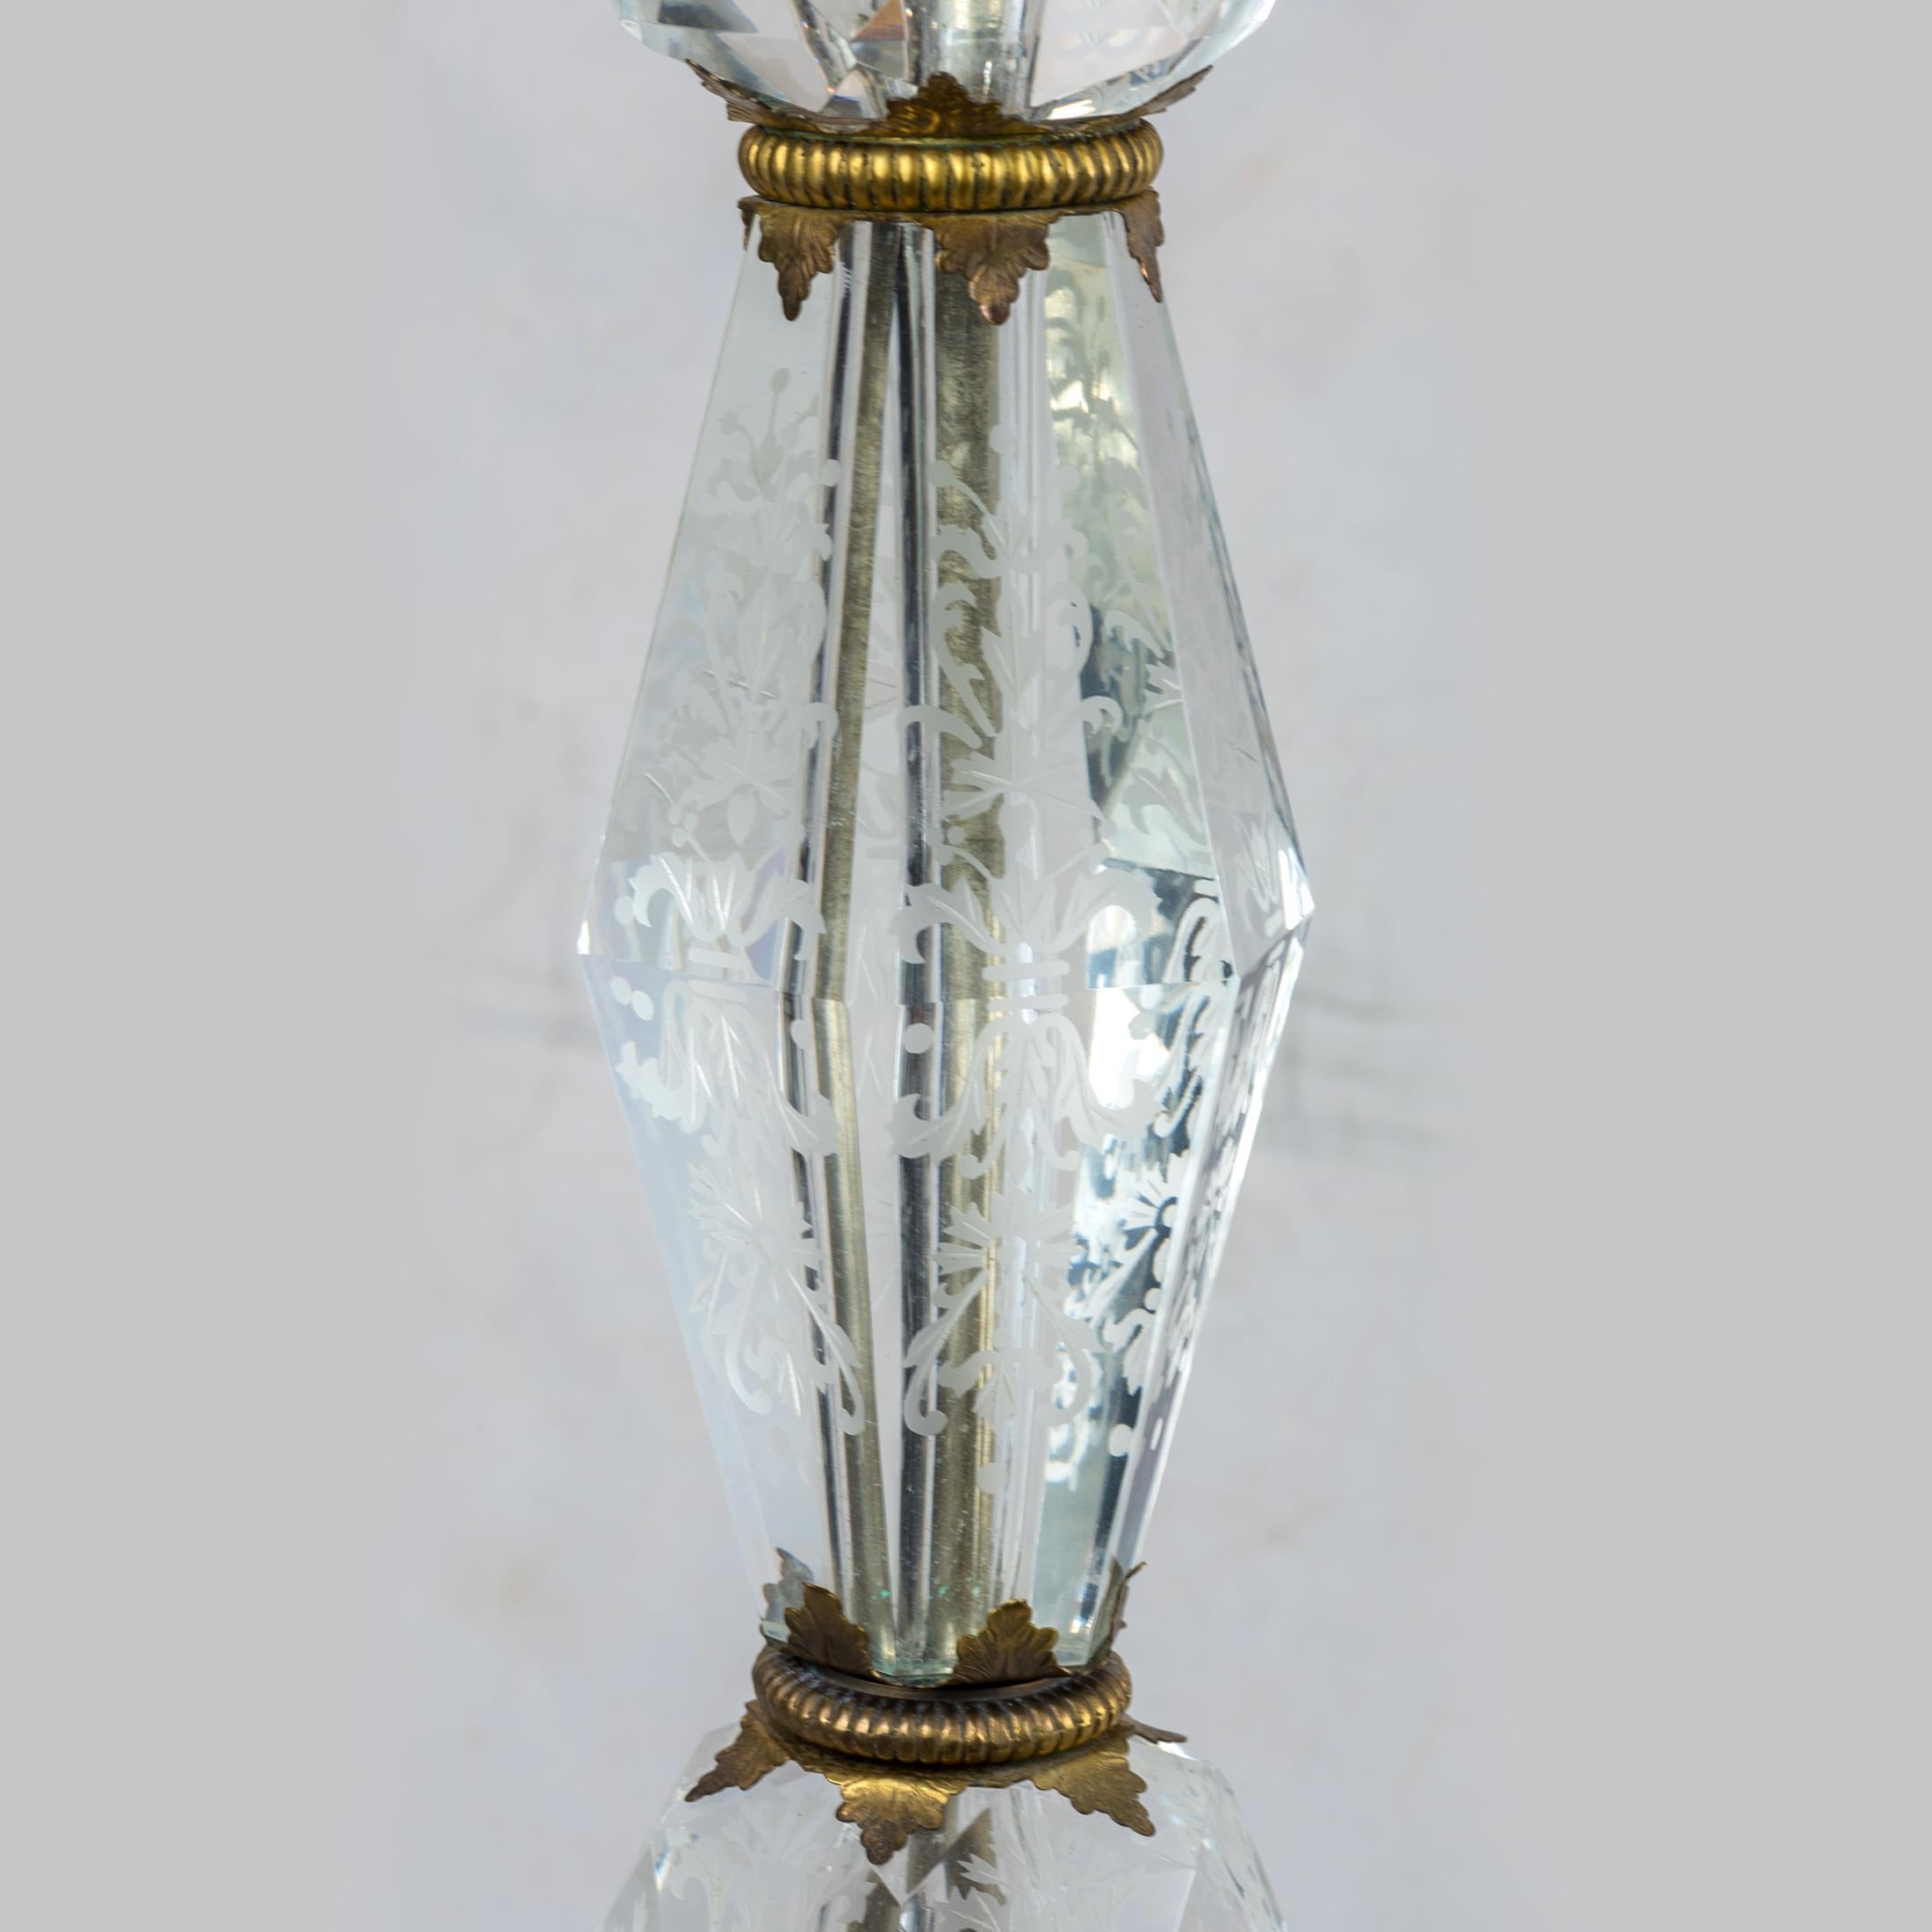 American French-Cut Glass Lamps with Etched Floral Decorations For Sale